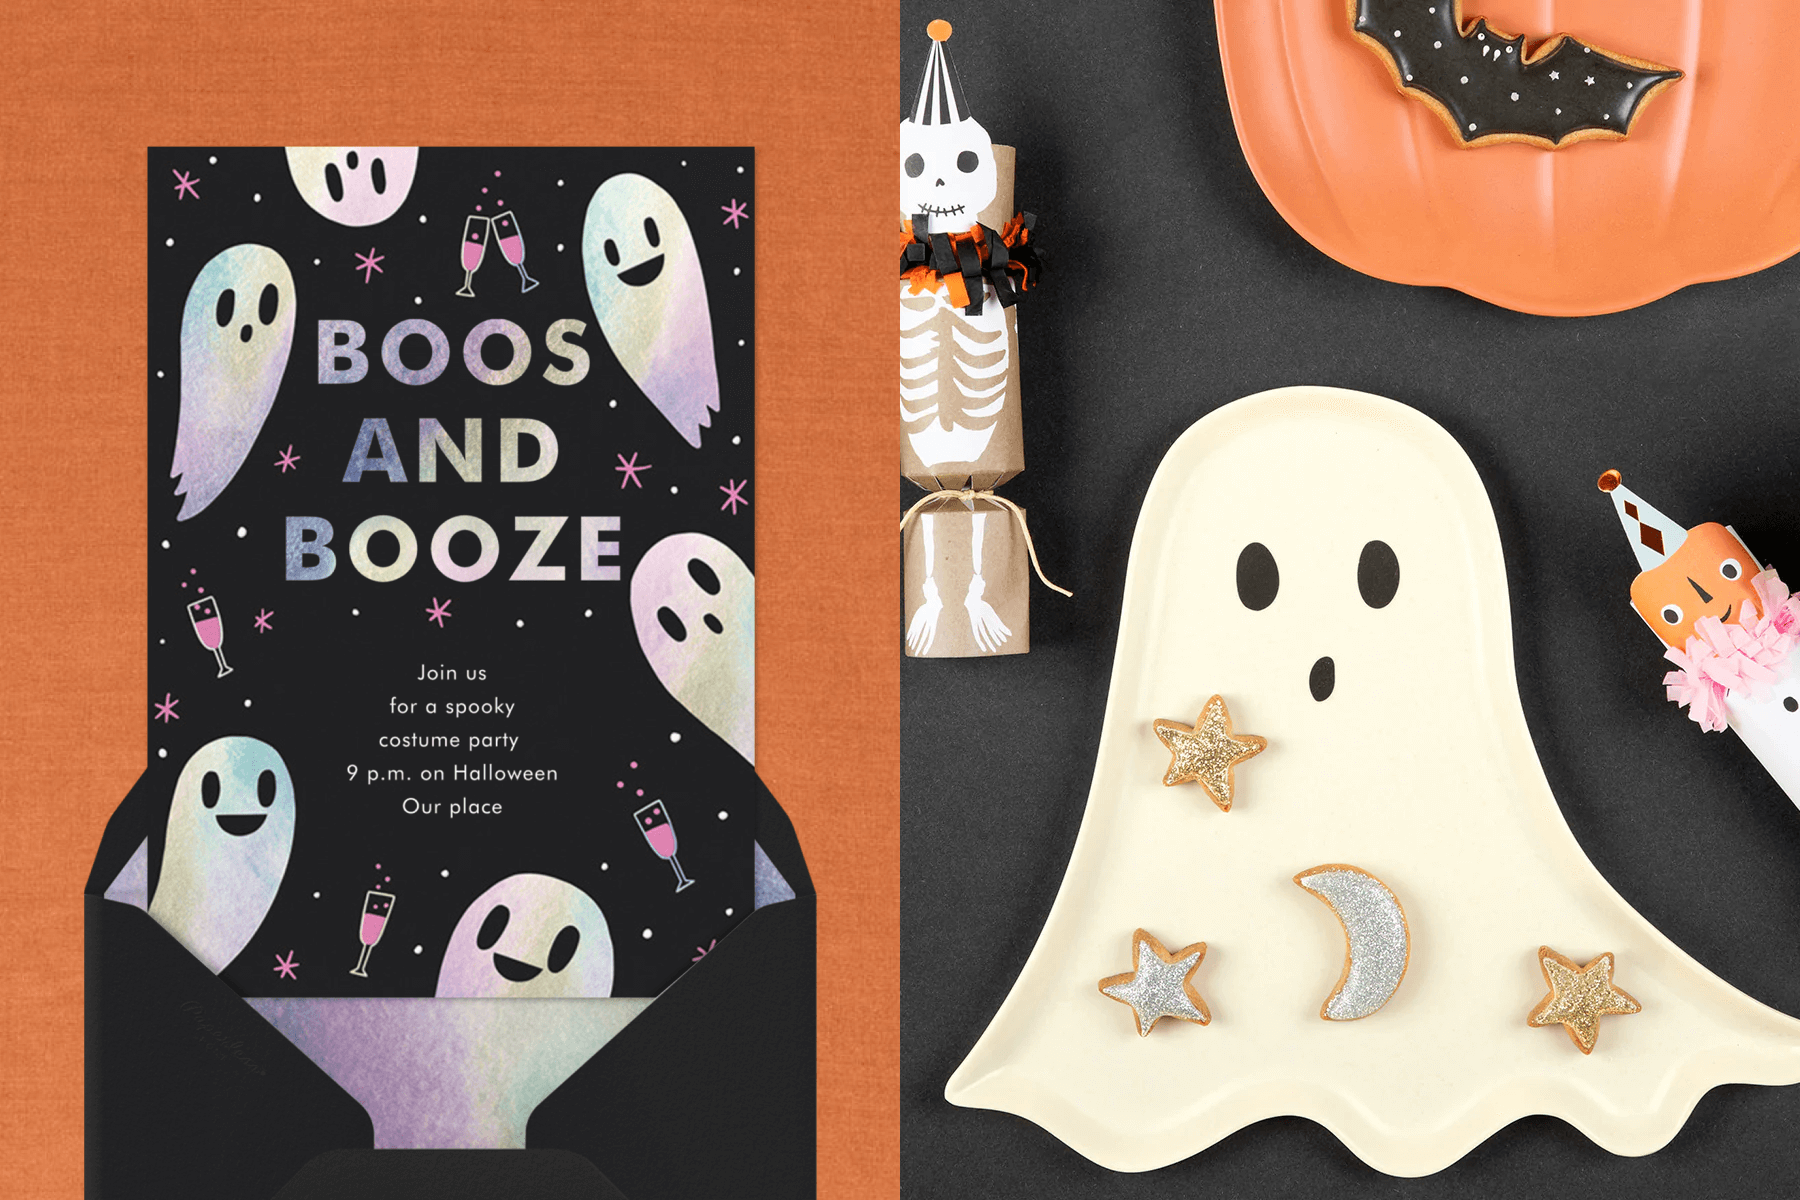 Left: A Halloween invitation with holographic ghosts and the words “Boos and Booze.” Right: A ghost plate and skeleton party crackers.